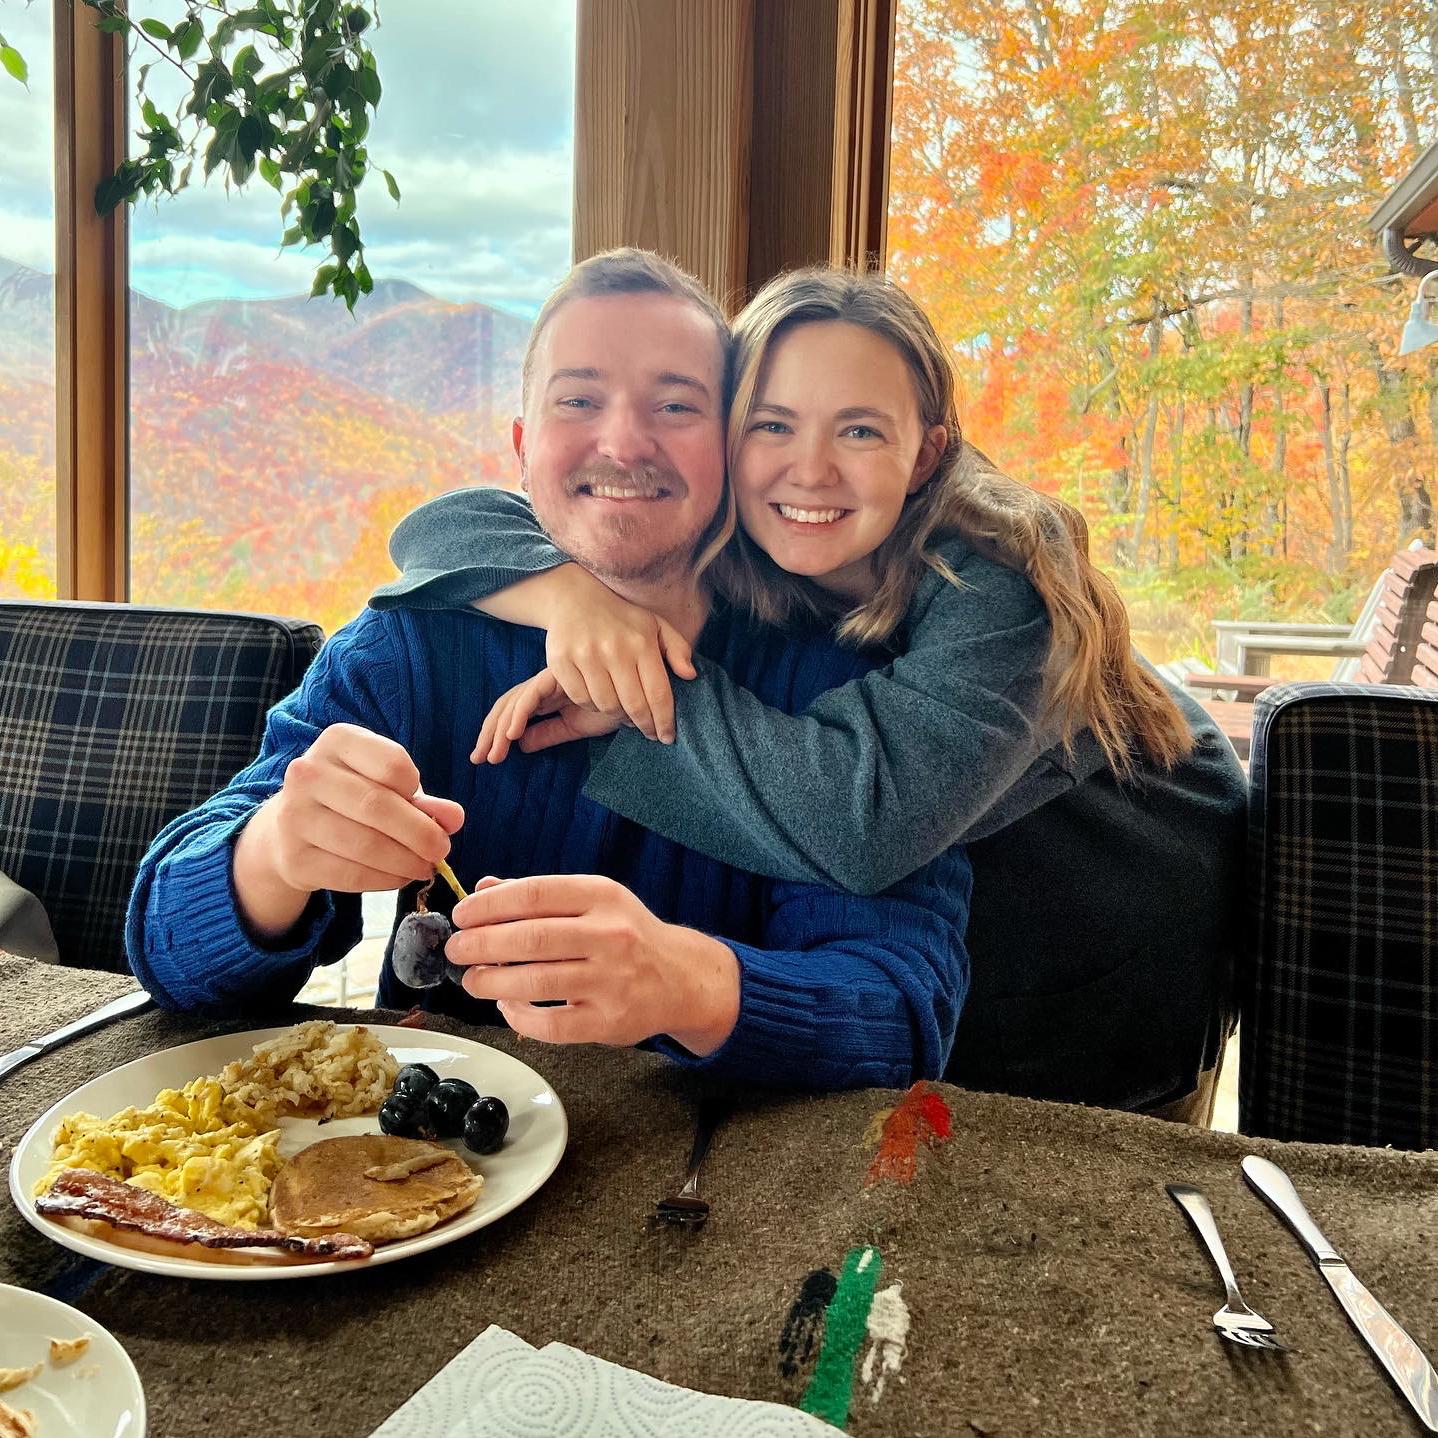 October 2022: Some of our favorite trips have been to the Lisicia's mountain house, but this one was particularly special as we celebrated Anna and Holden's engagement.